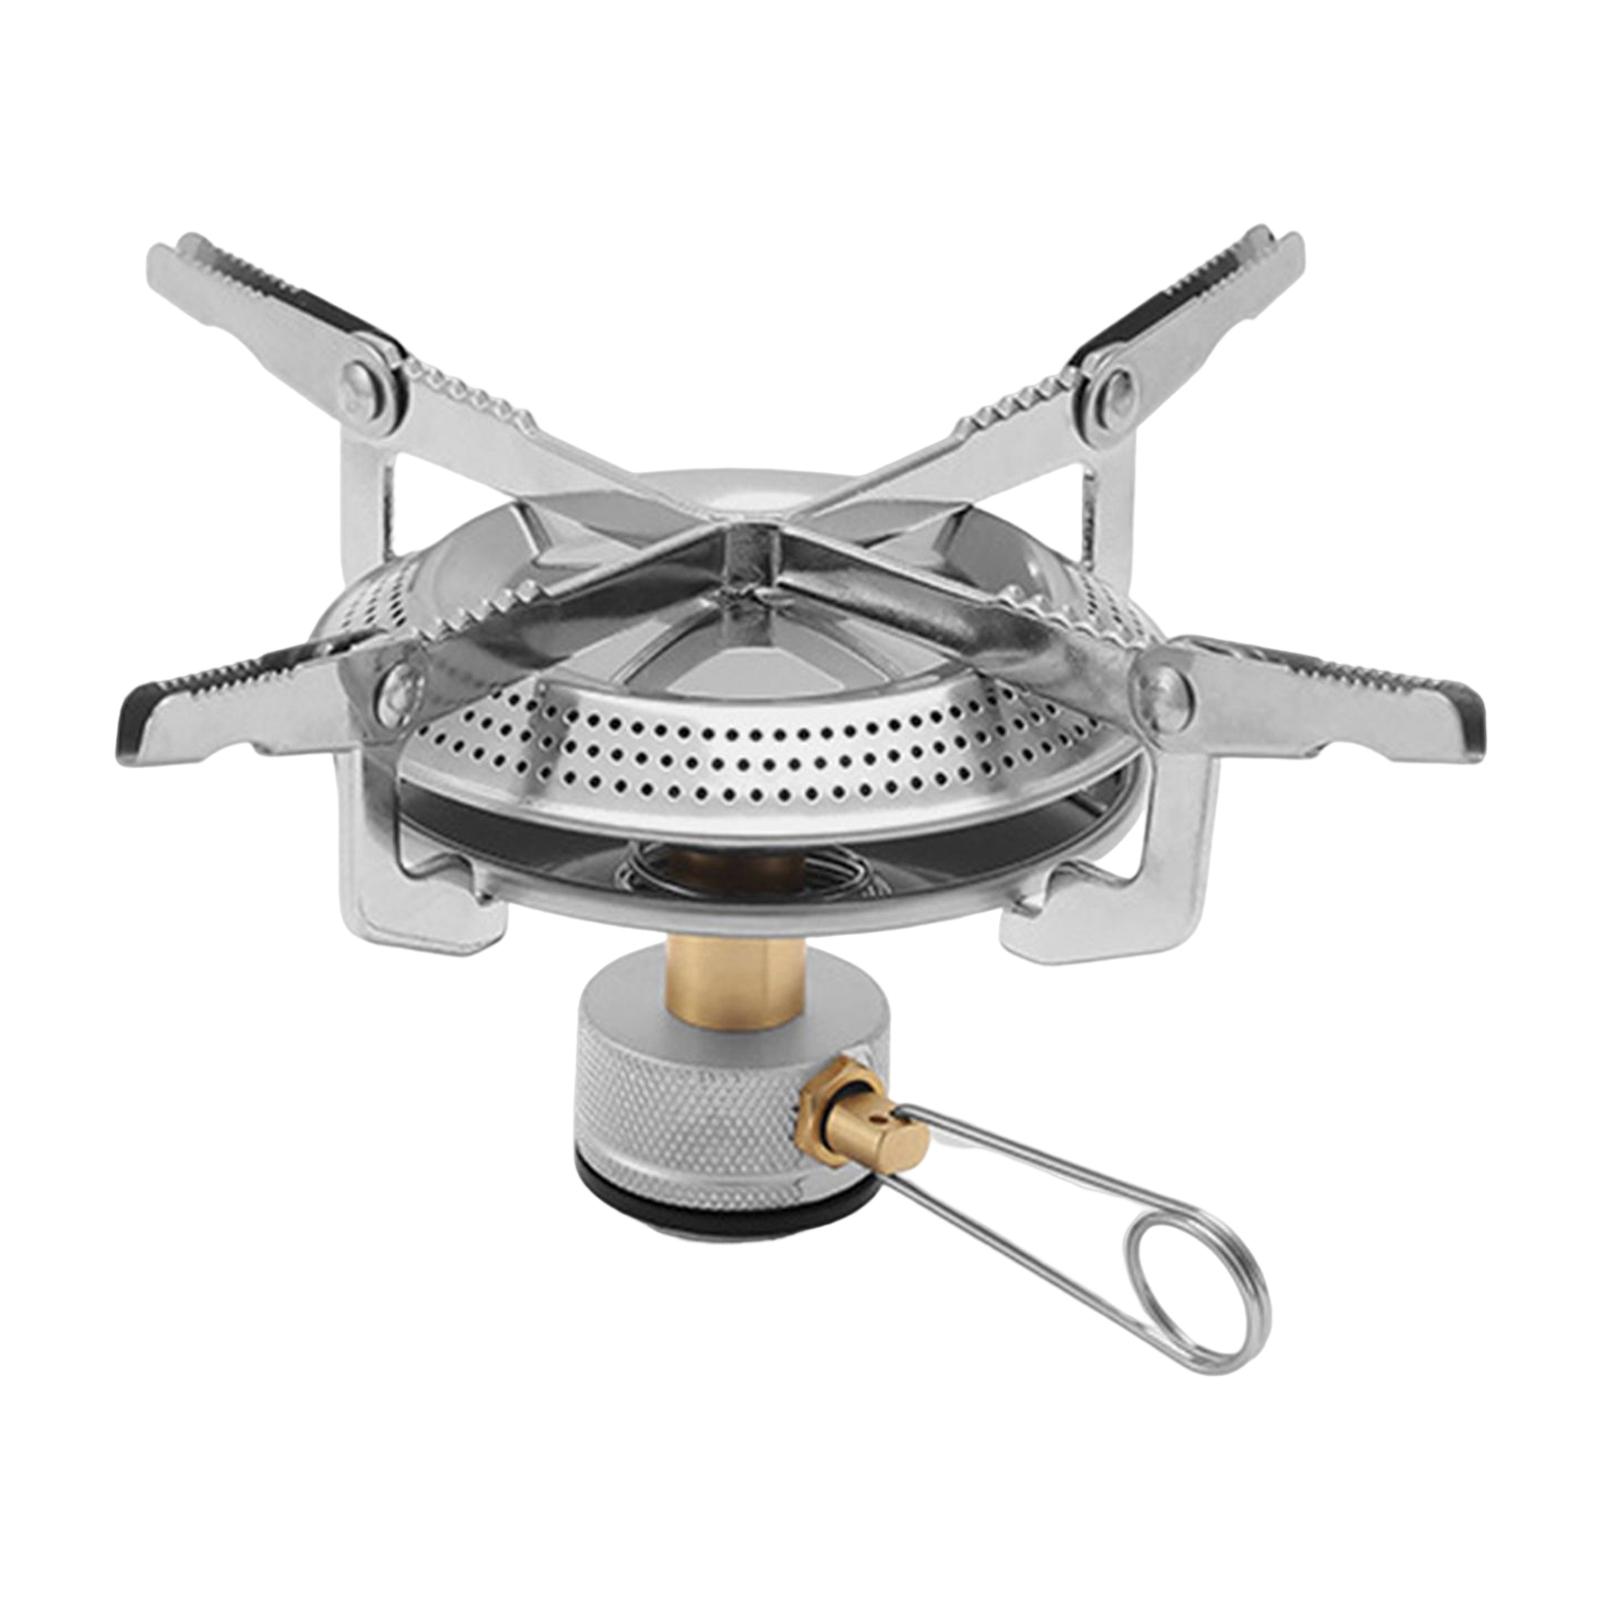 Portable Camping Gas Stove Outdoor Stove Burner Adjustable Valve for Cooking